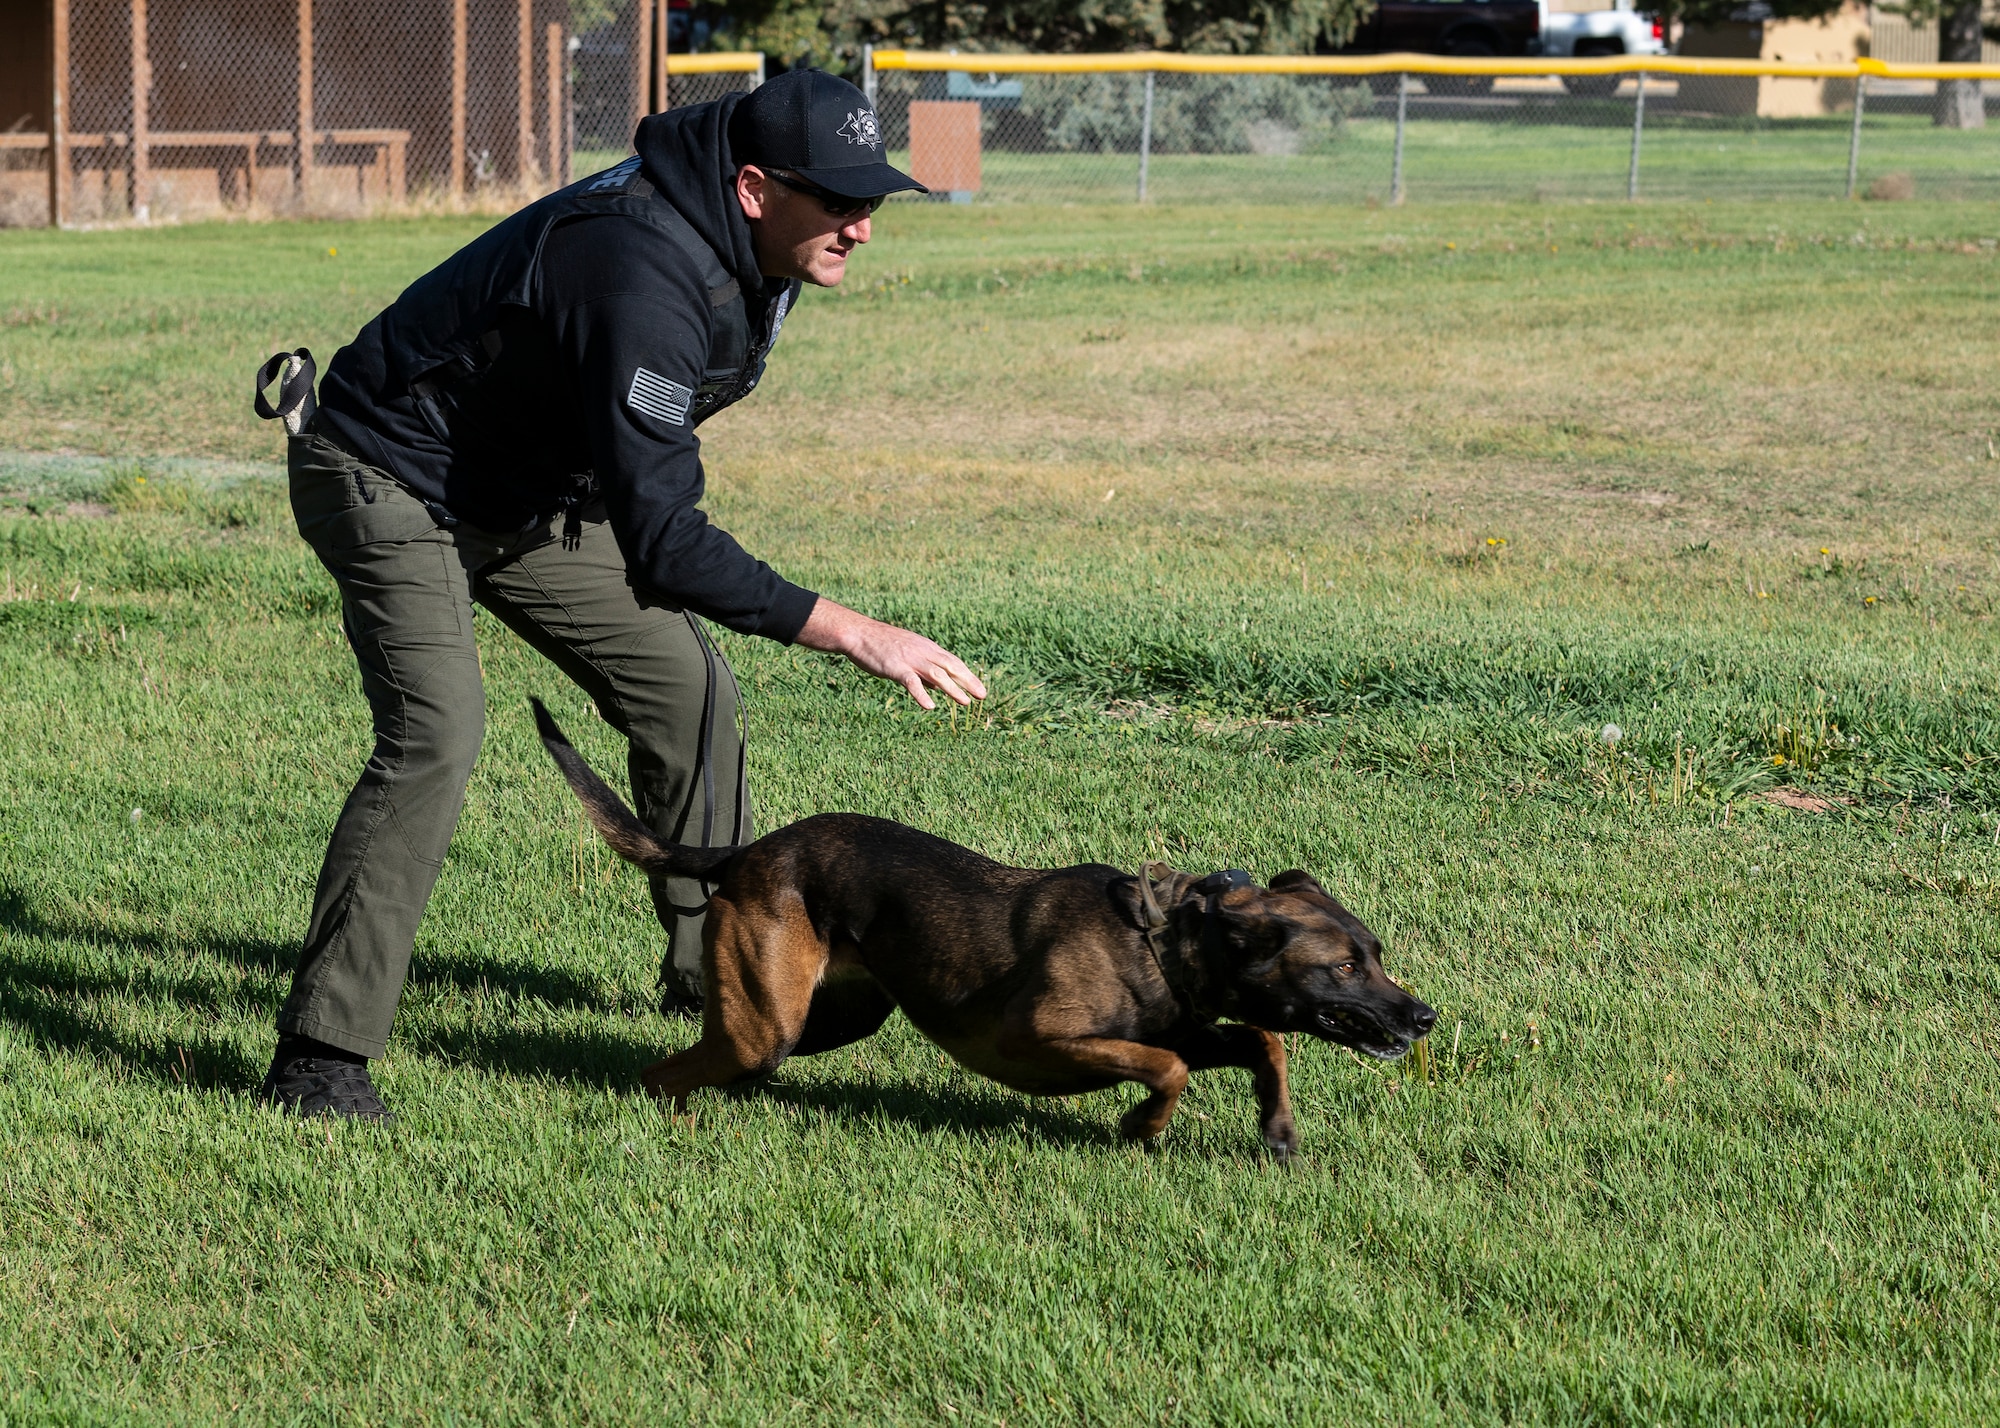 Brandon Esparza, Meridian Police Department officer, releases his K-9, KB, to apprehend a decoy in a bitesuit during a competition with the 366th Security Forces Squadron K-9 team.